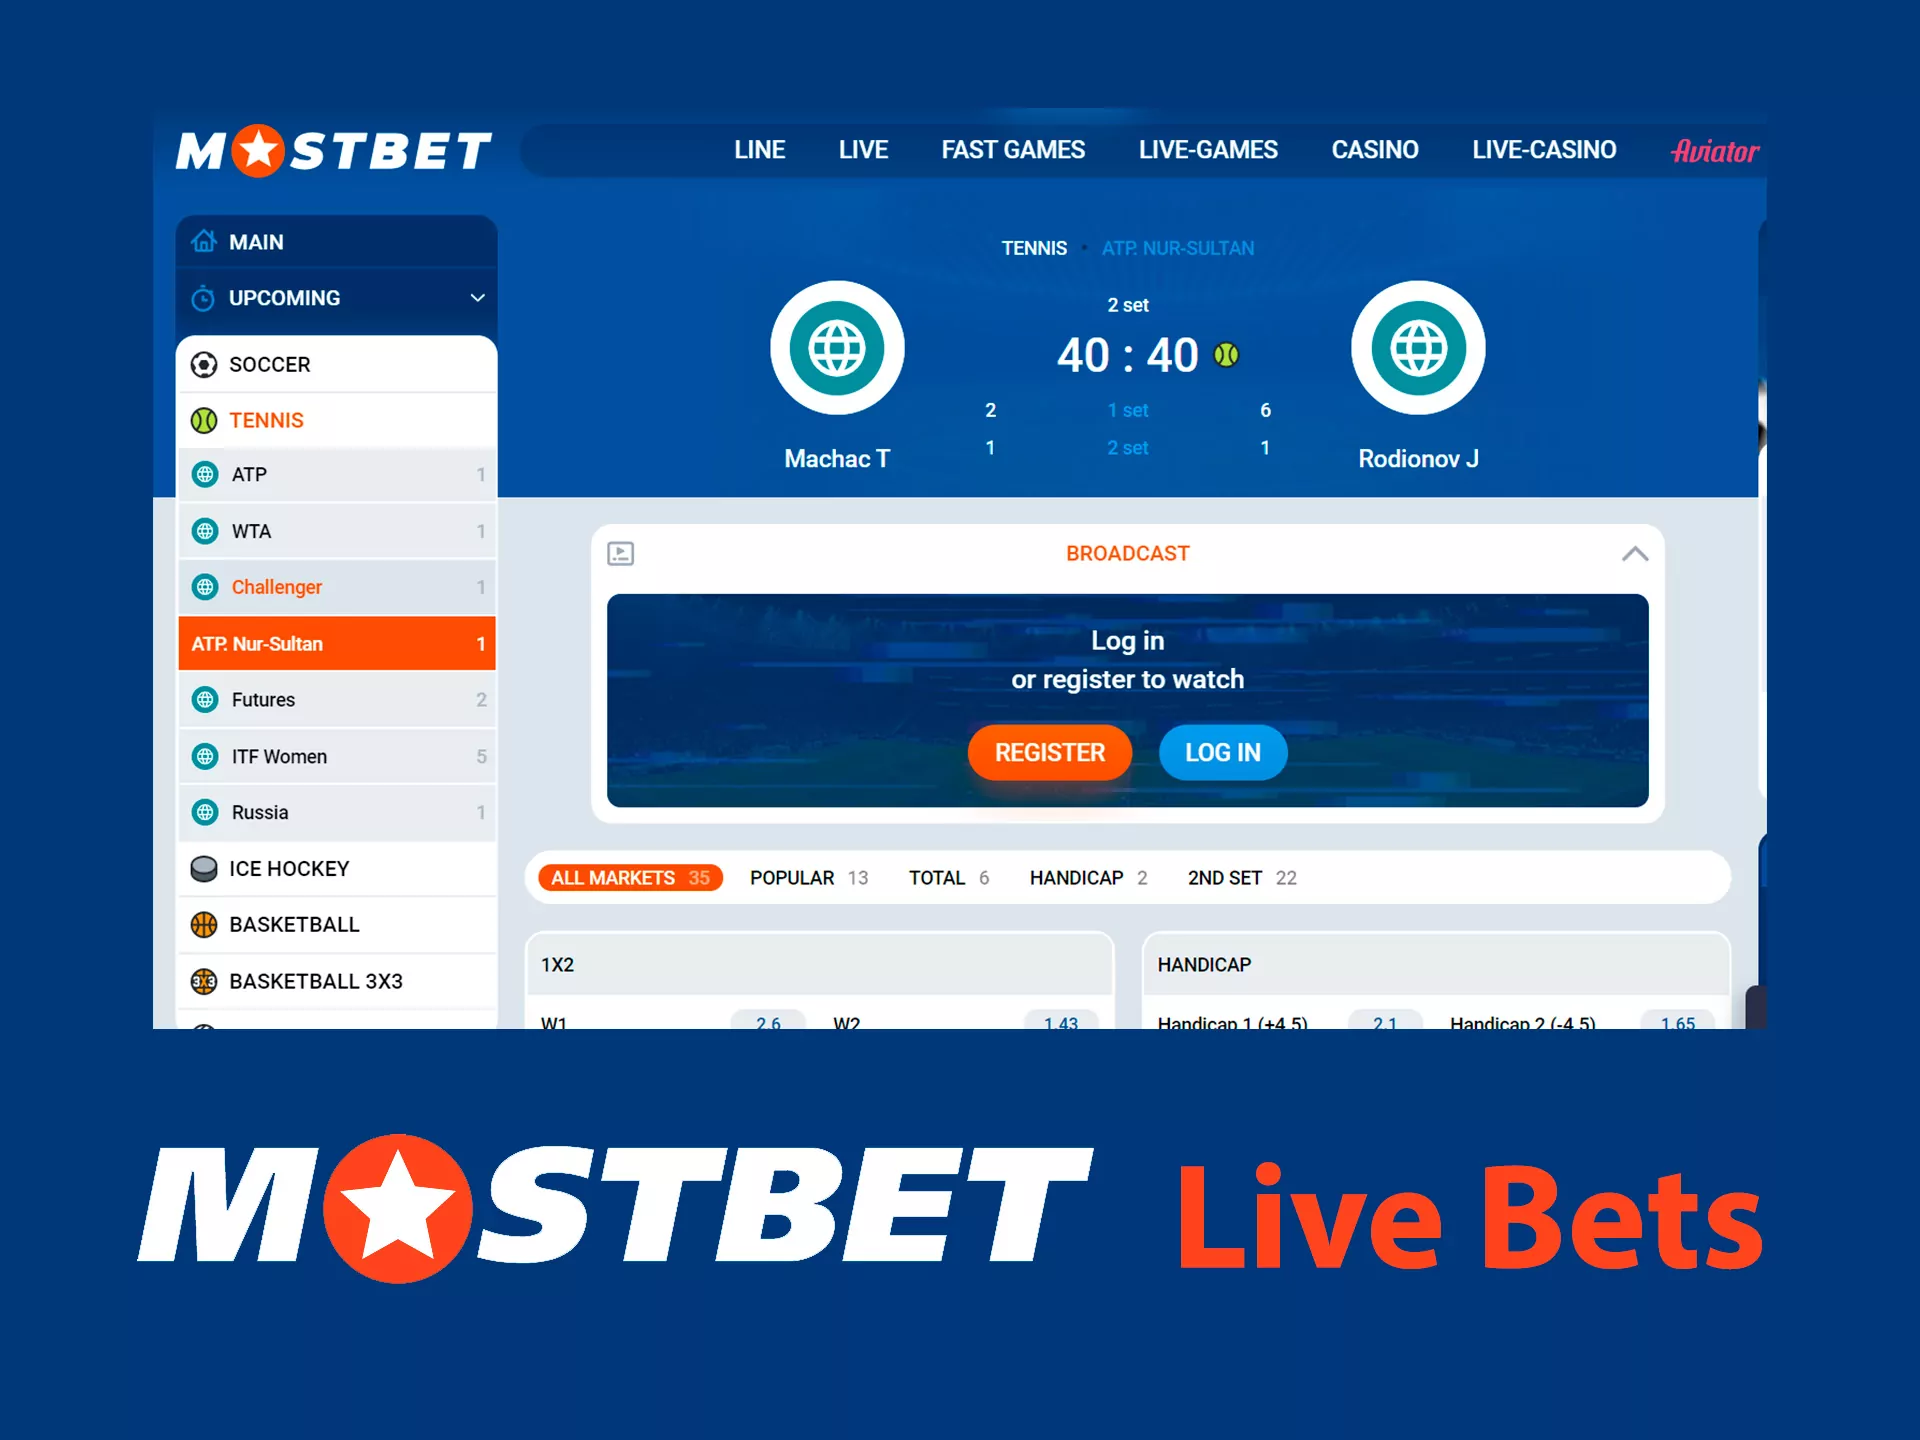 Live bets at Mostbet.